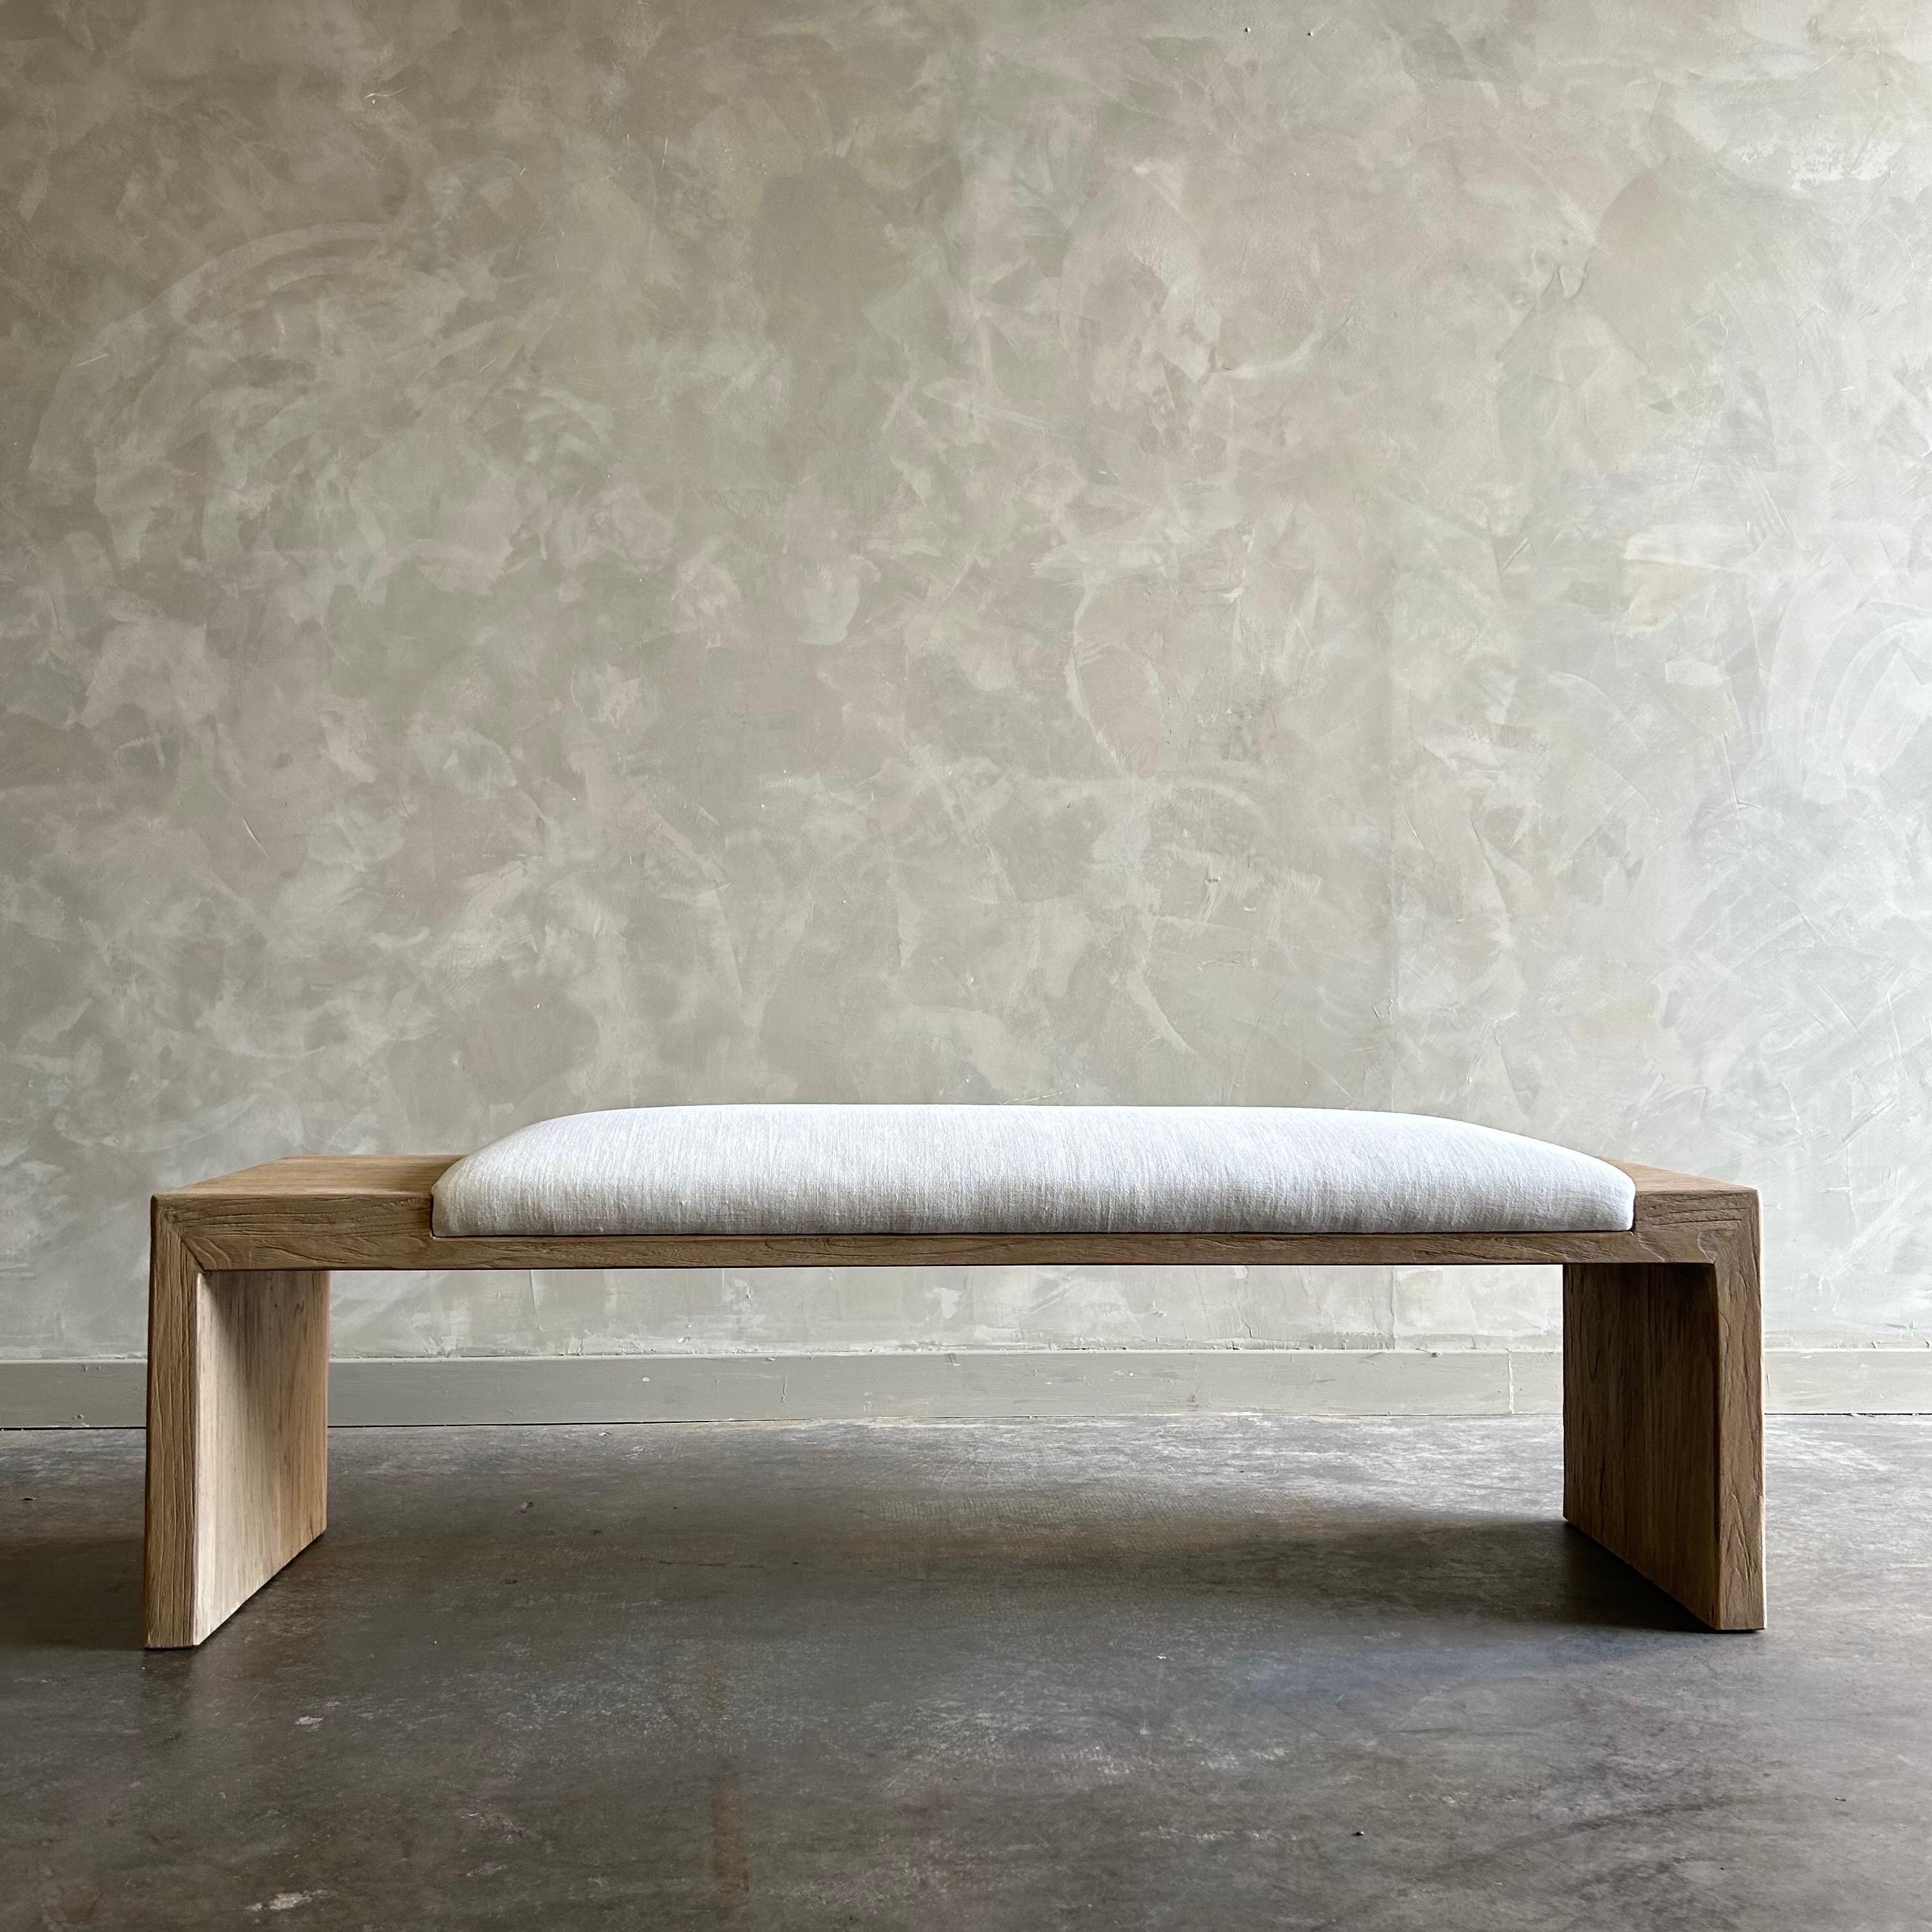 Casi Elm Bench
These old elm timbers show in its most primal, natural form. The artisanal construction methods highlight the elm woods beautiful grain pattern & knots and fissures from its past life. The most authentic materials are hand selected,